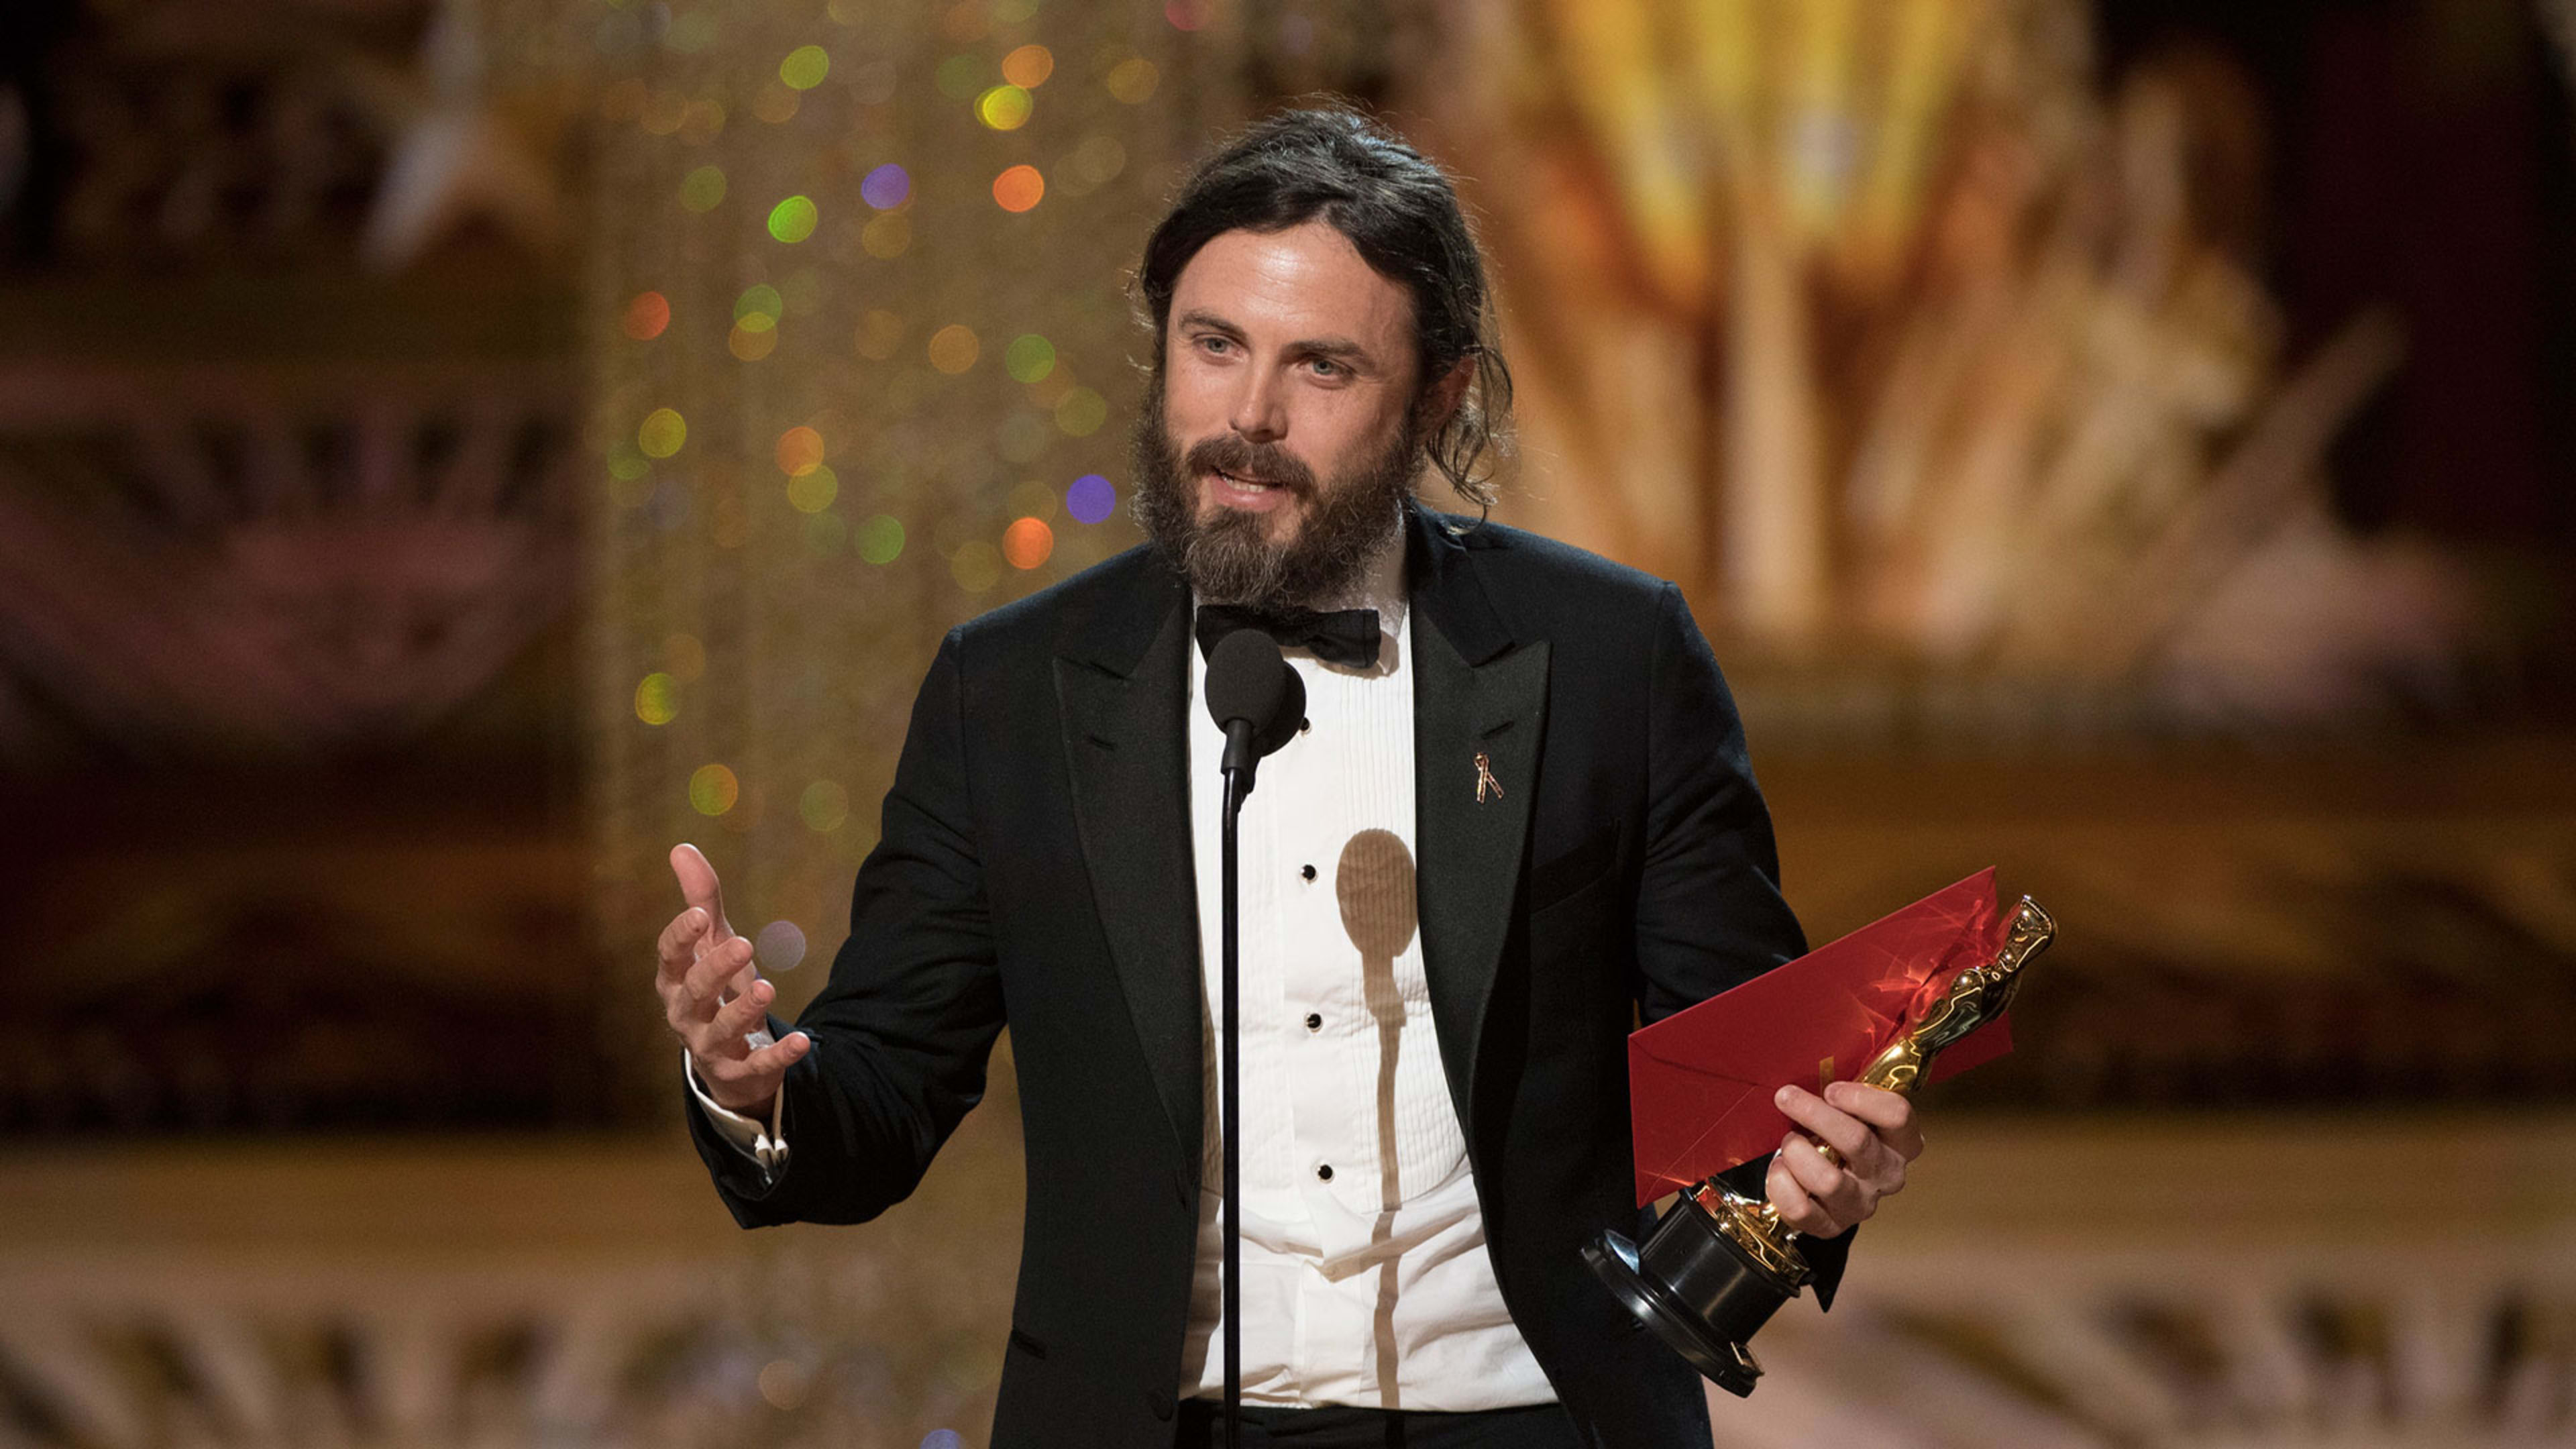 Casey Affleck bows out of presenting at the Oscars, amid #MeToo backlash